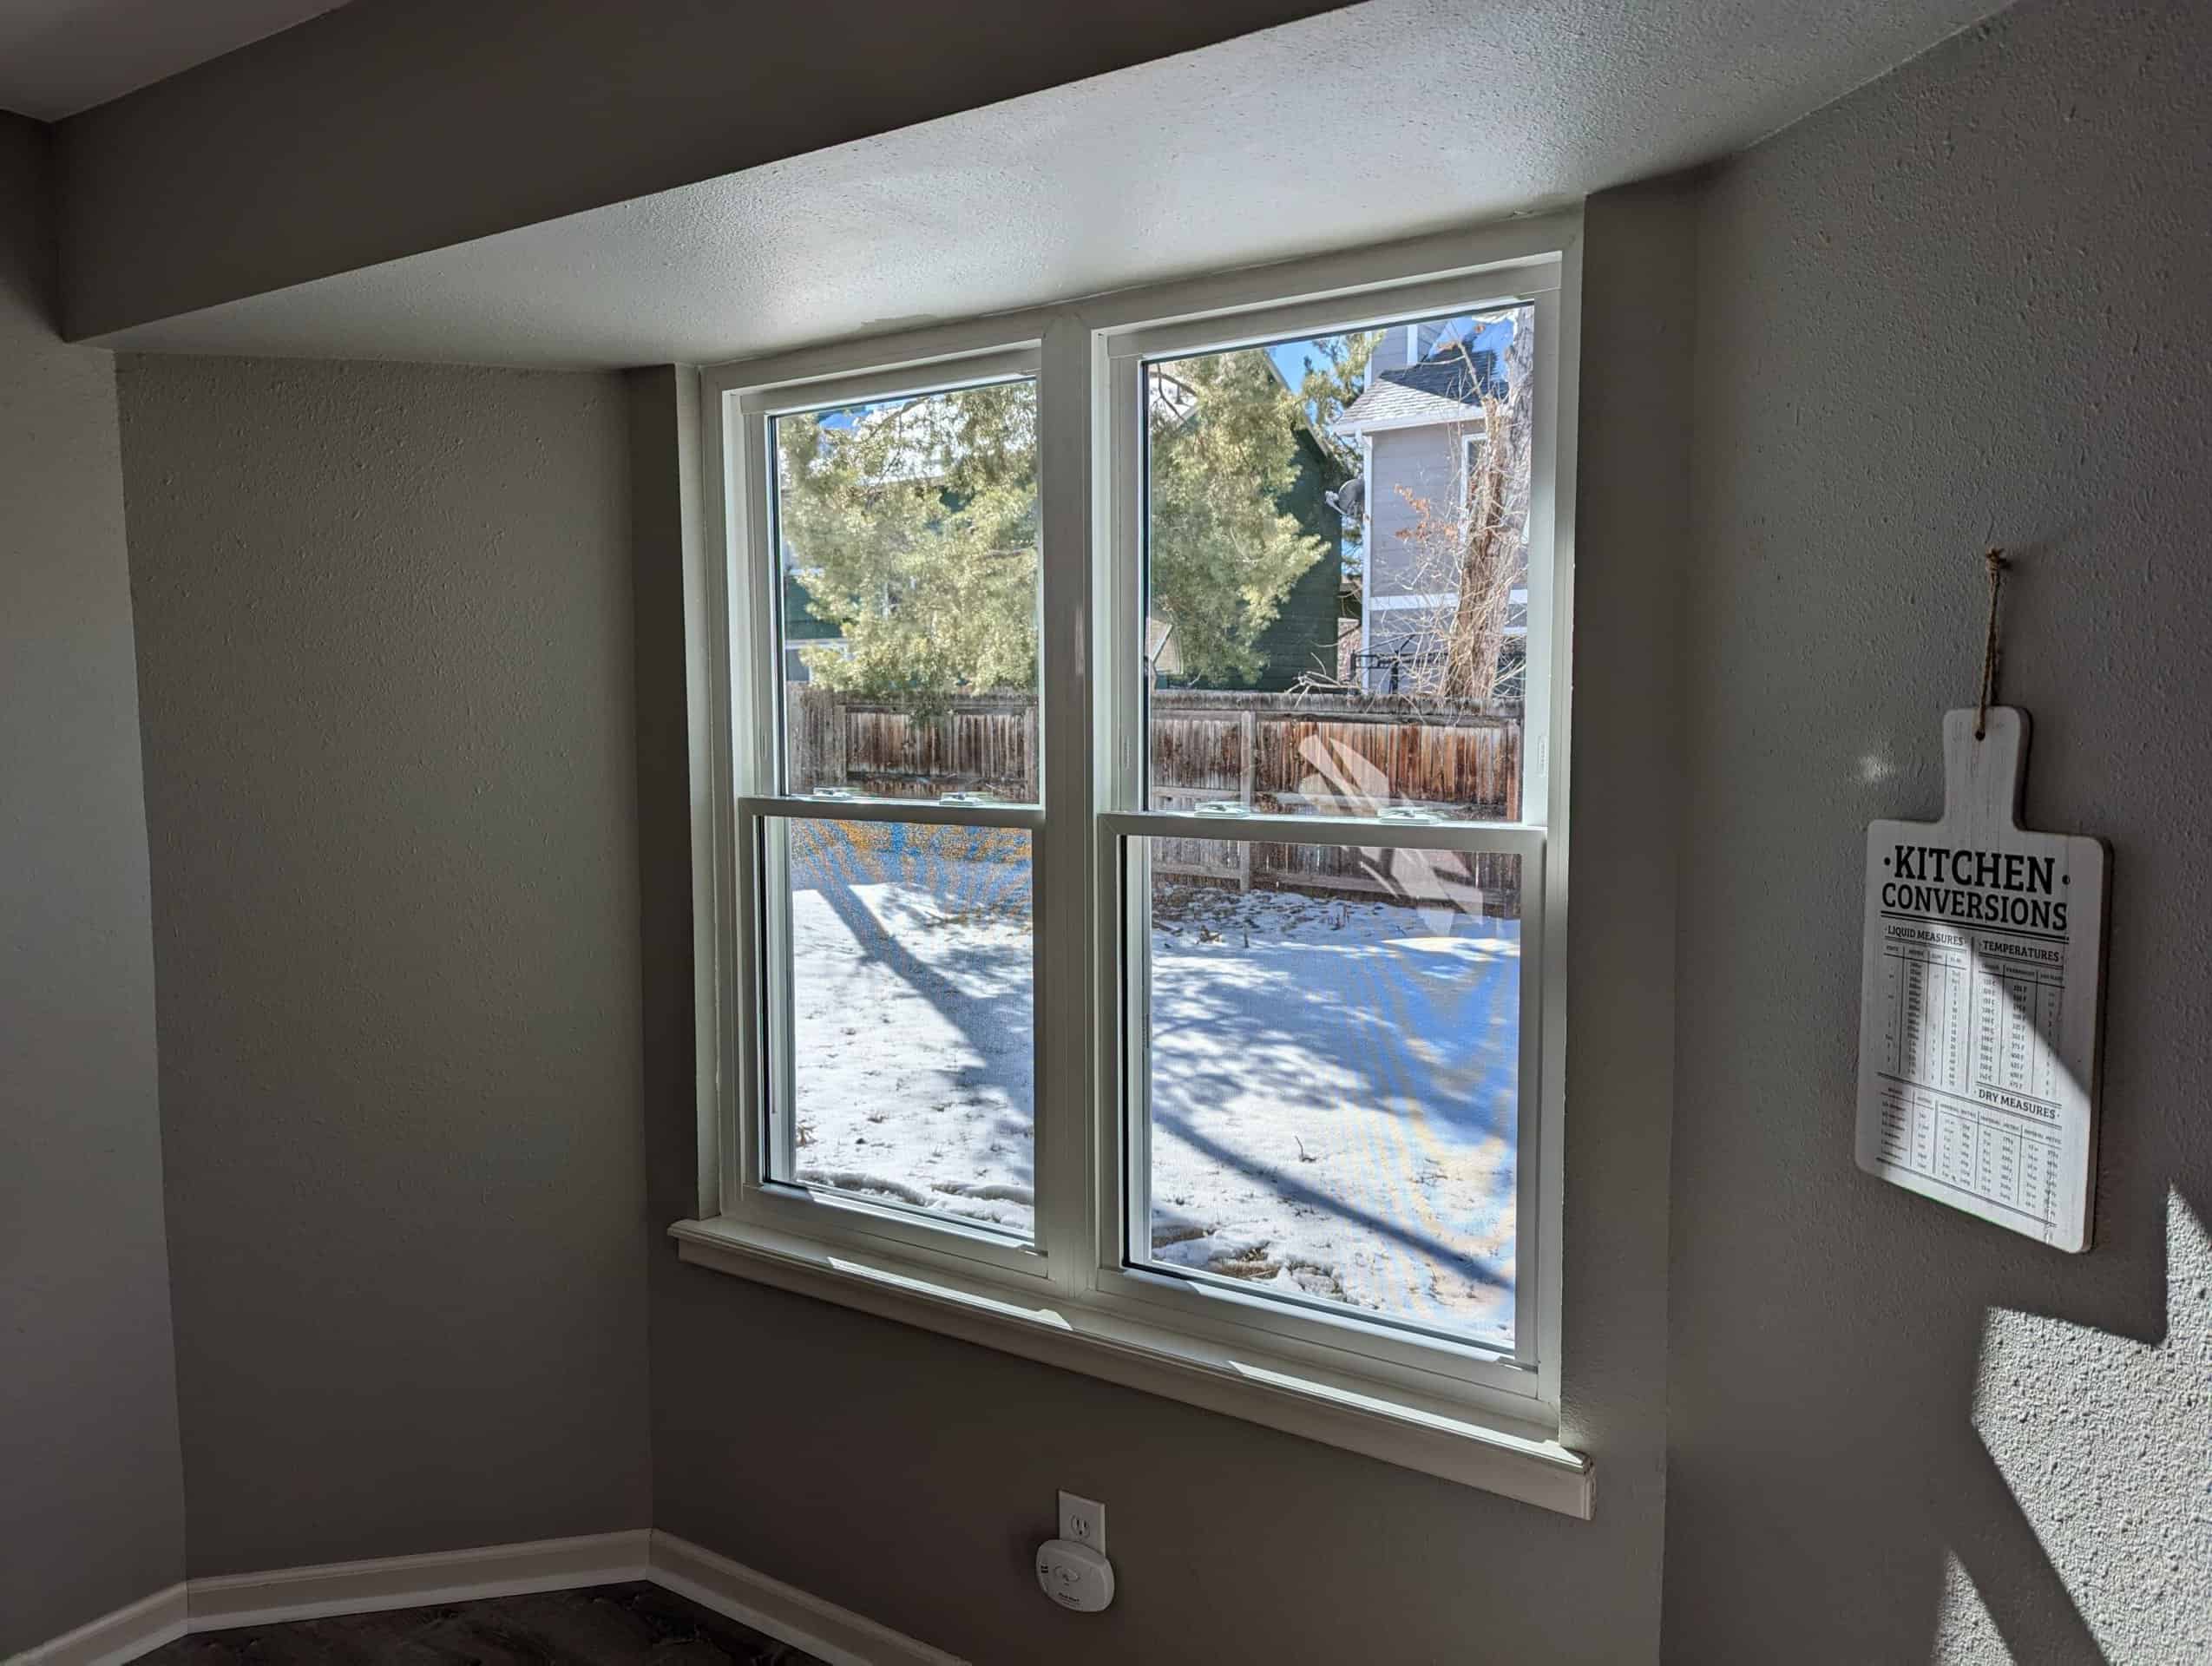 Interior view of SoftLite replacement windows installed in a home